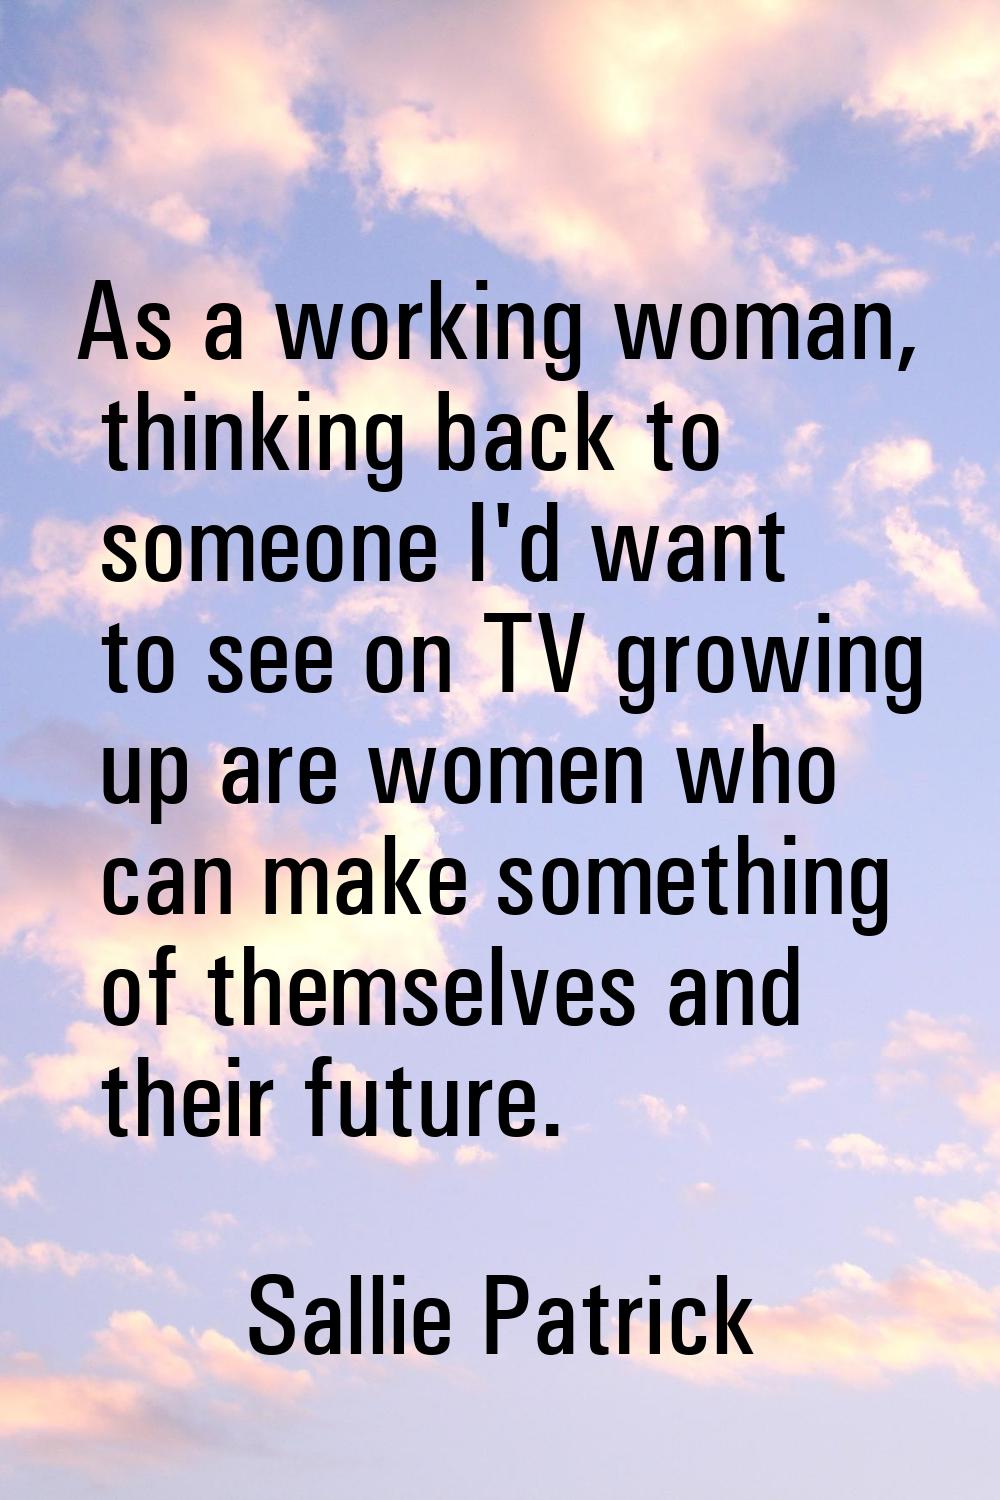 As a working woman, thinking back to someone I'd want to see on TV growing up are women who can mak